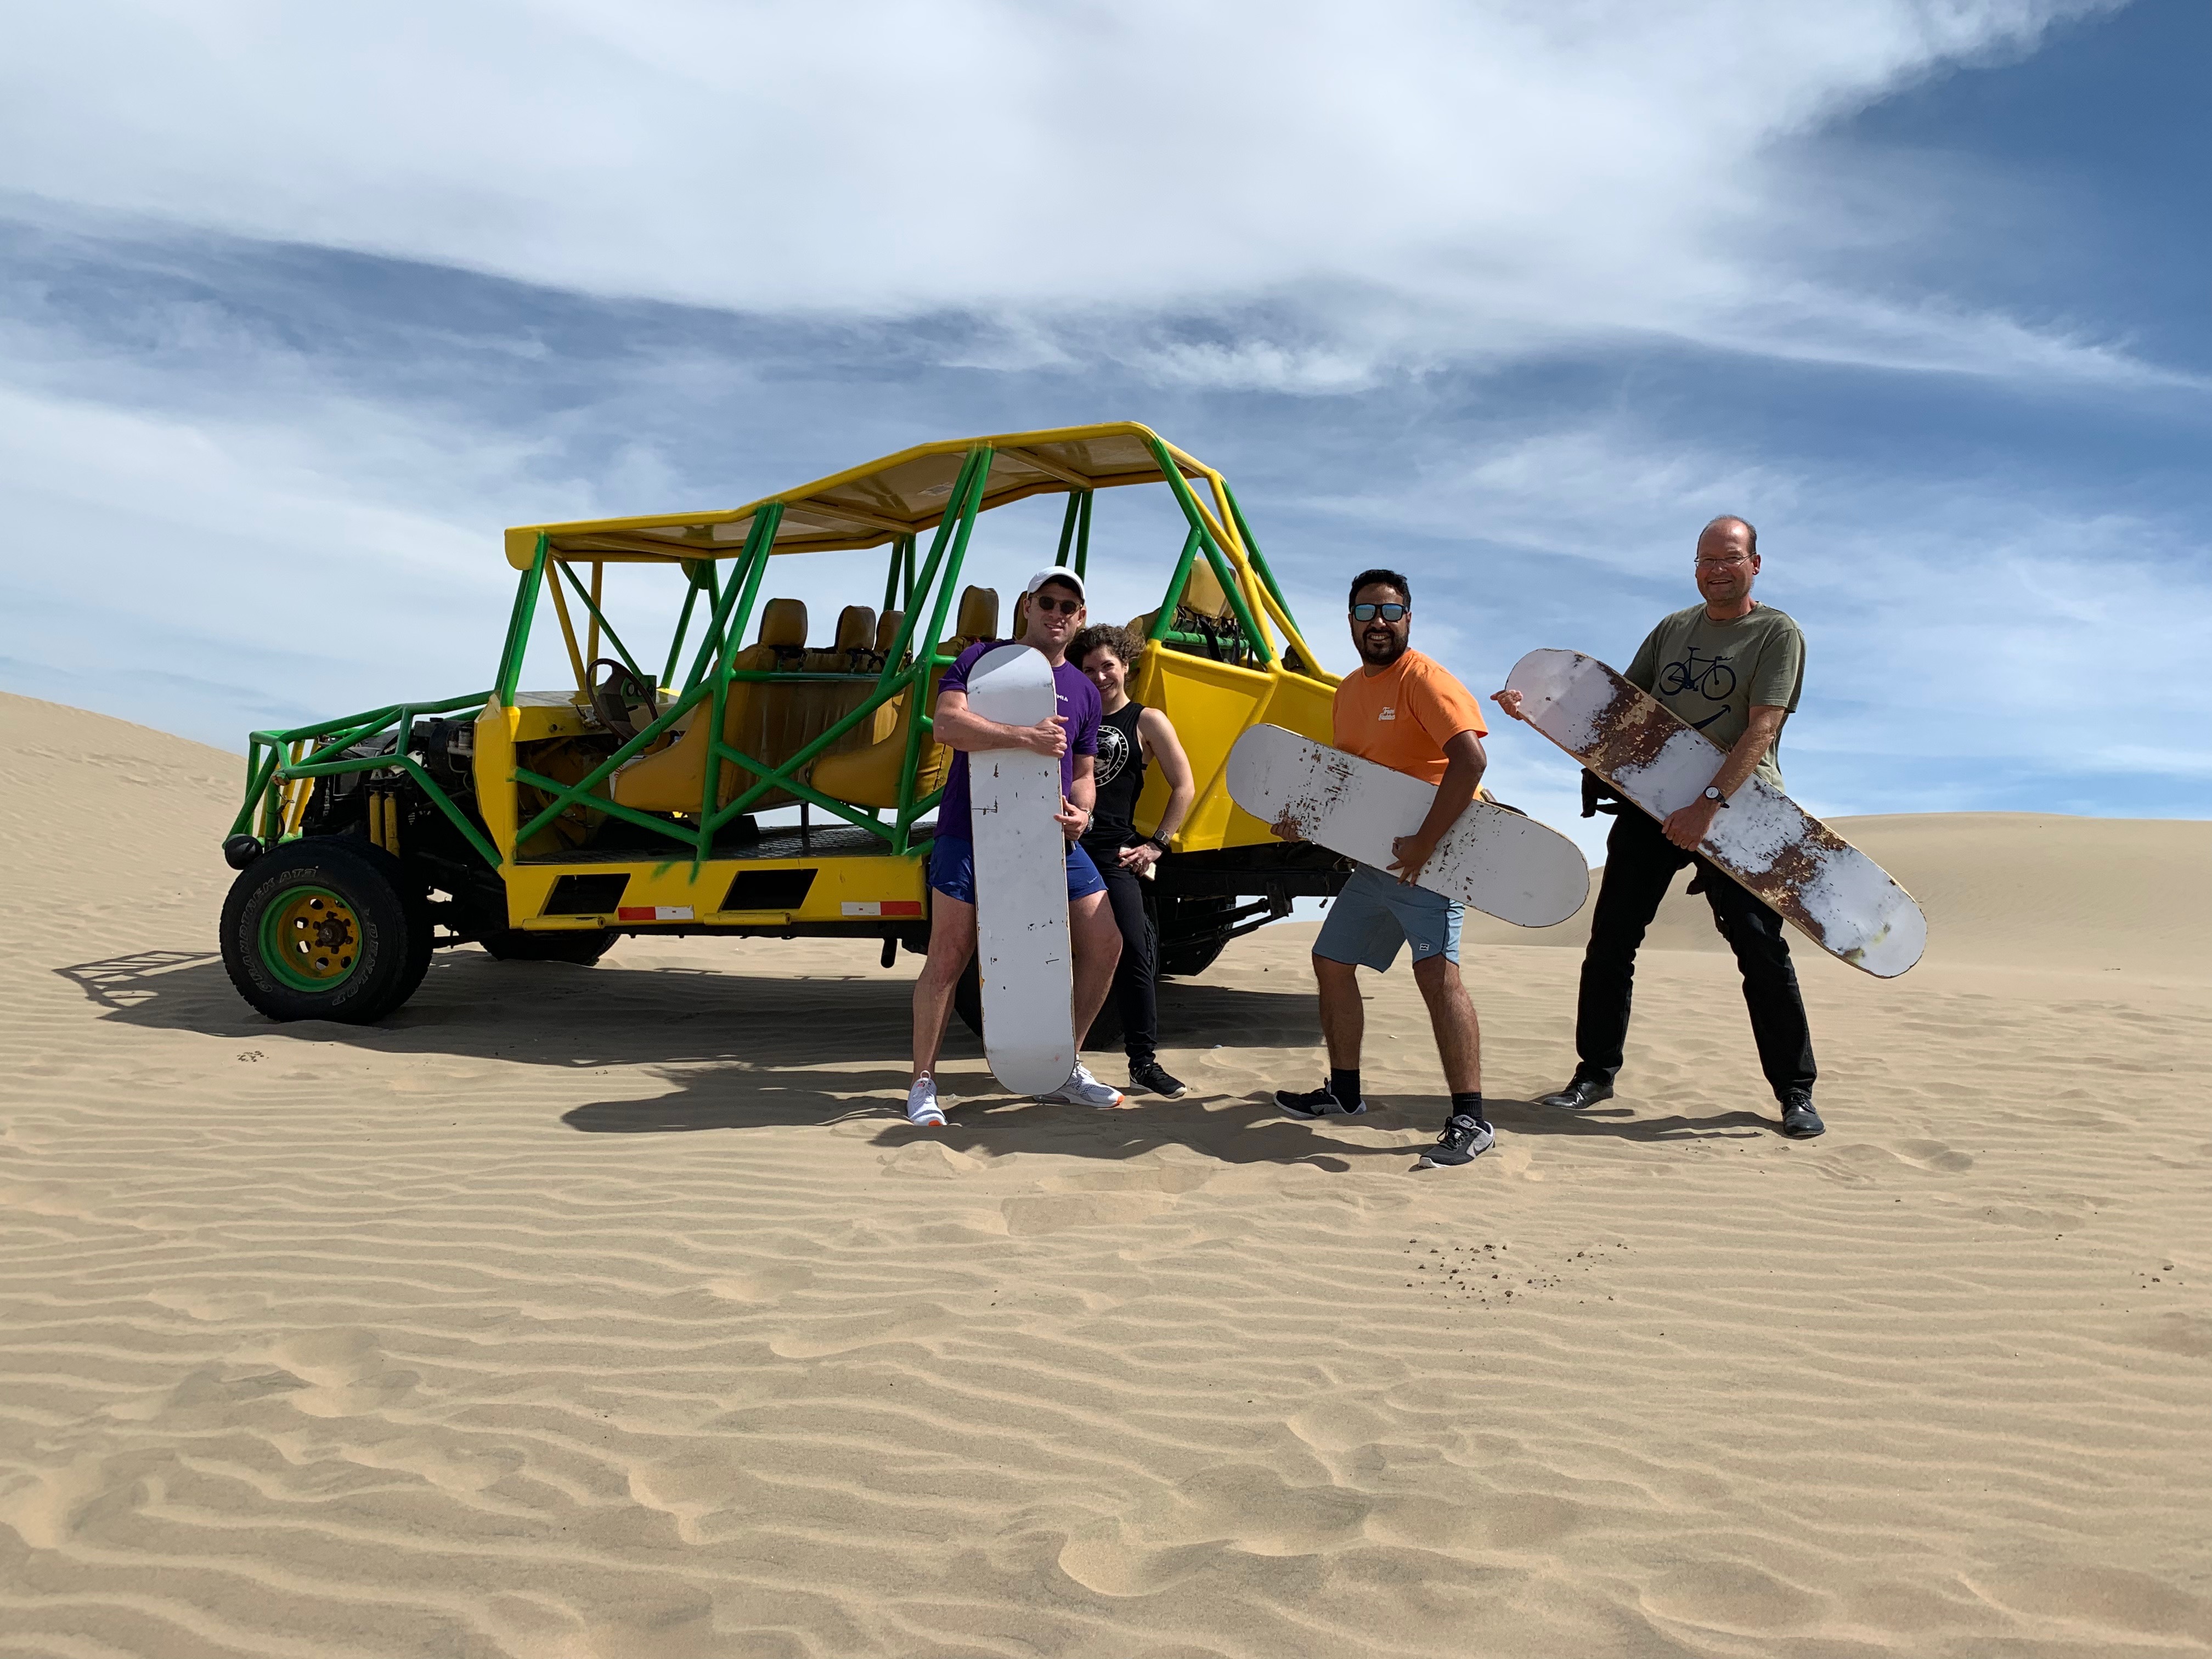 From Lima: Paracas and Huacachina Oasis - 2 days/ 1 night